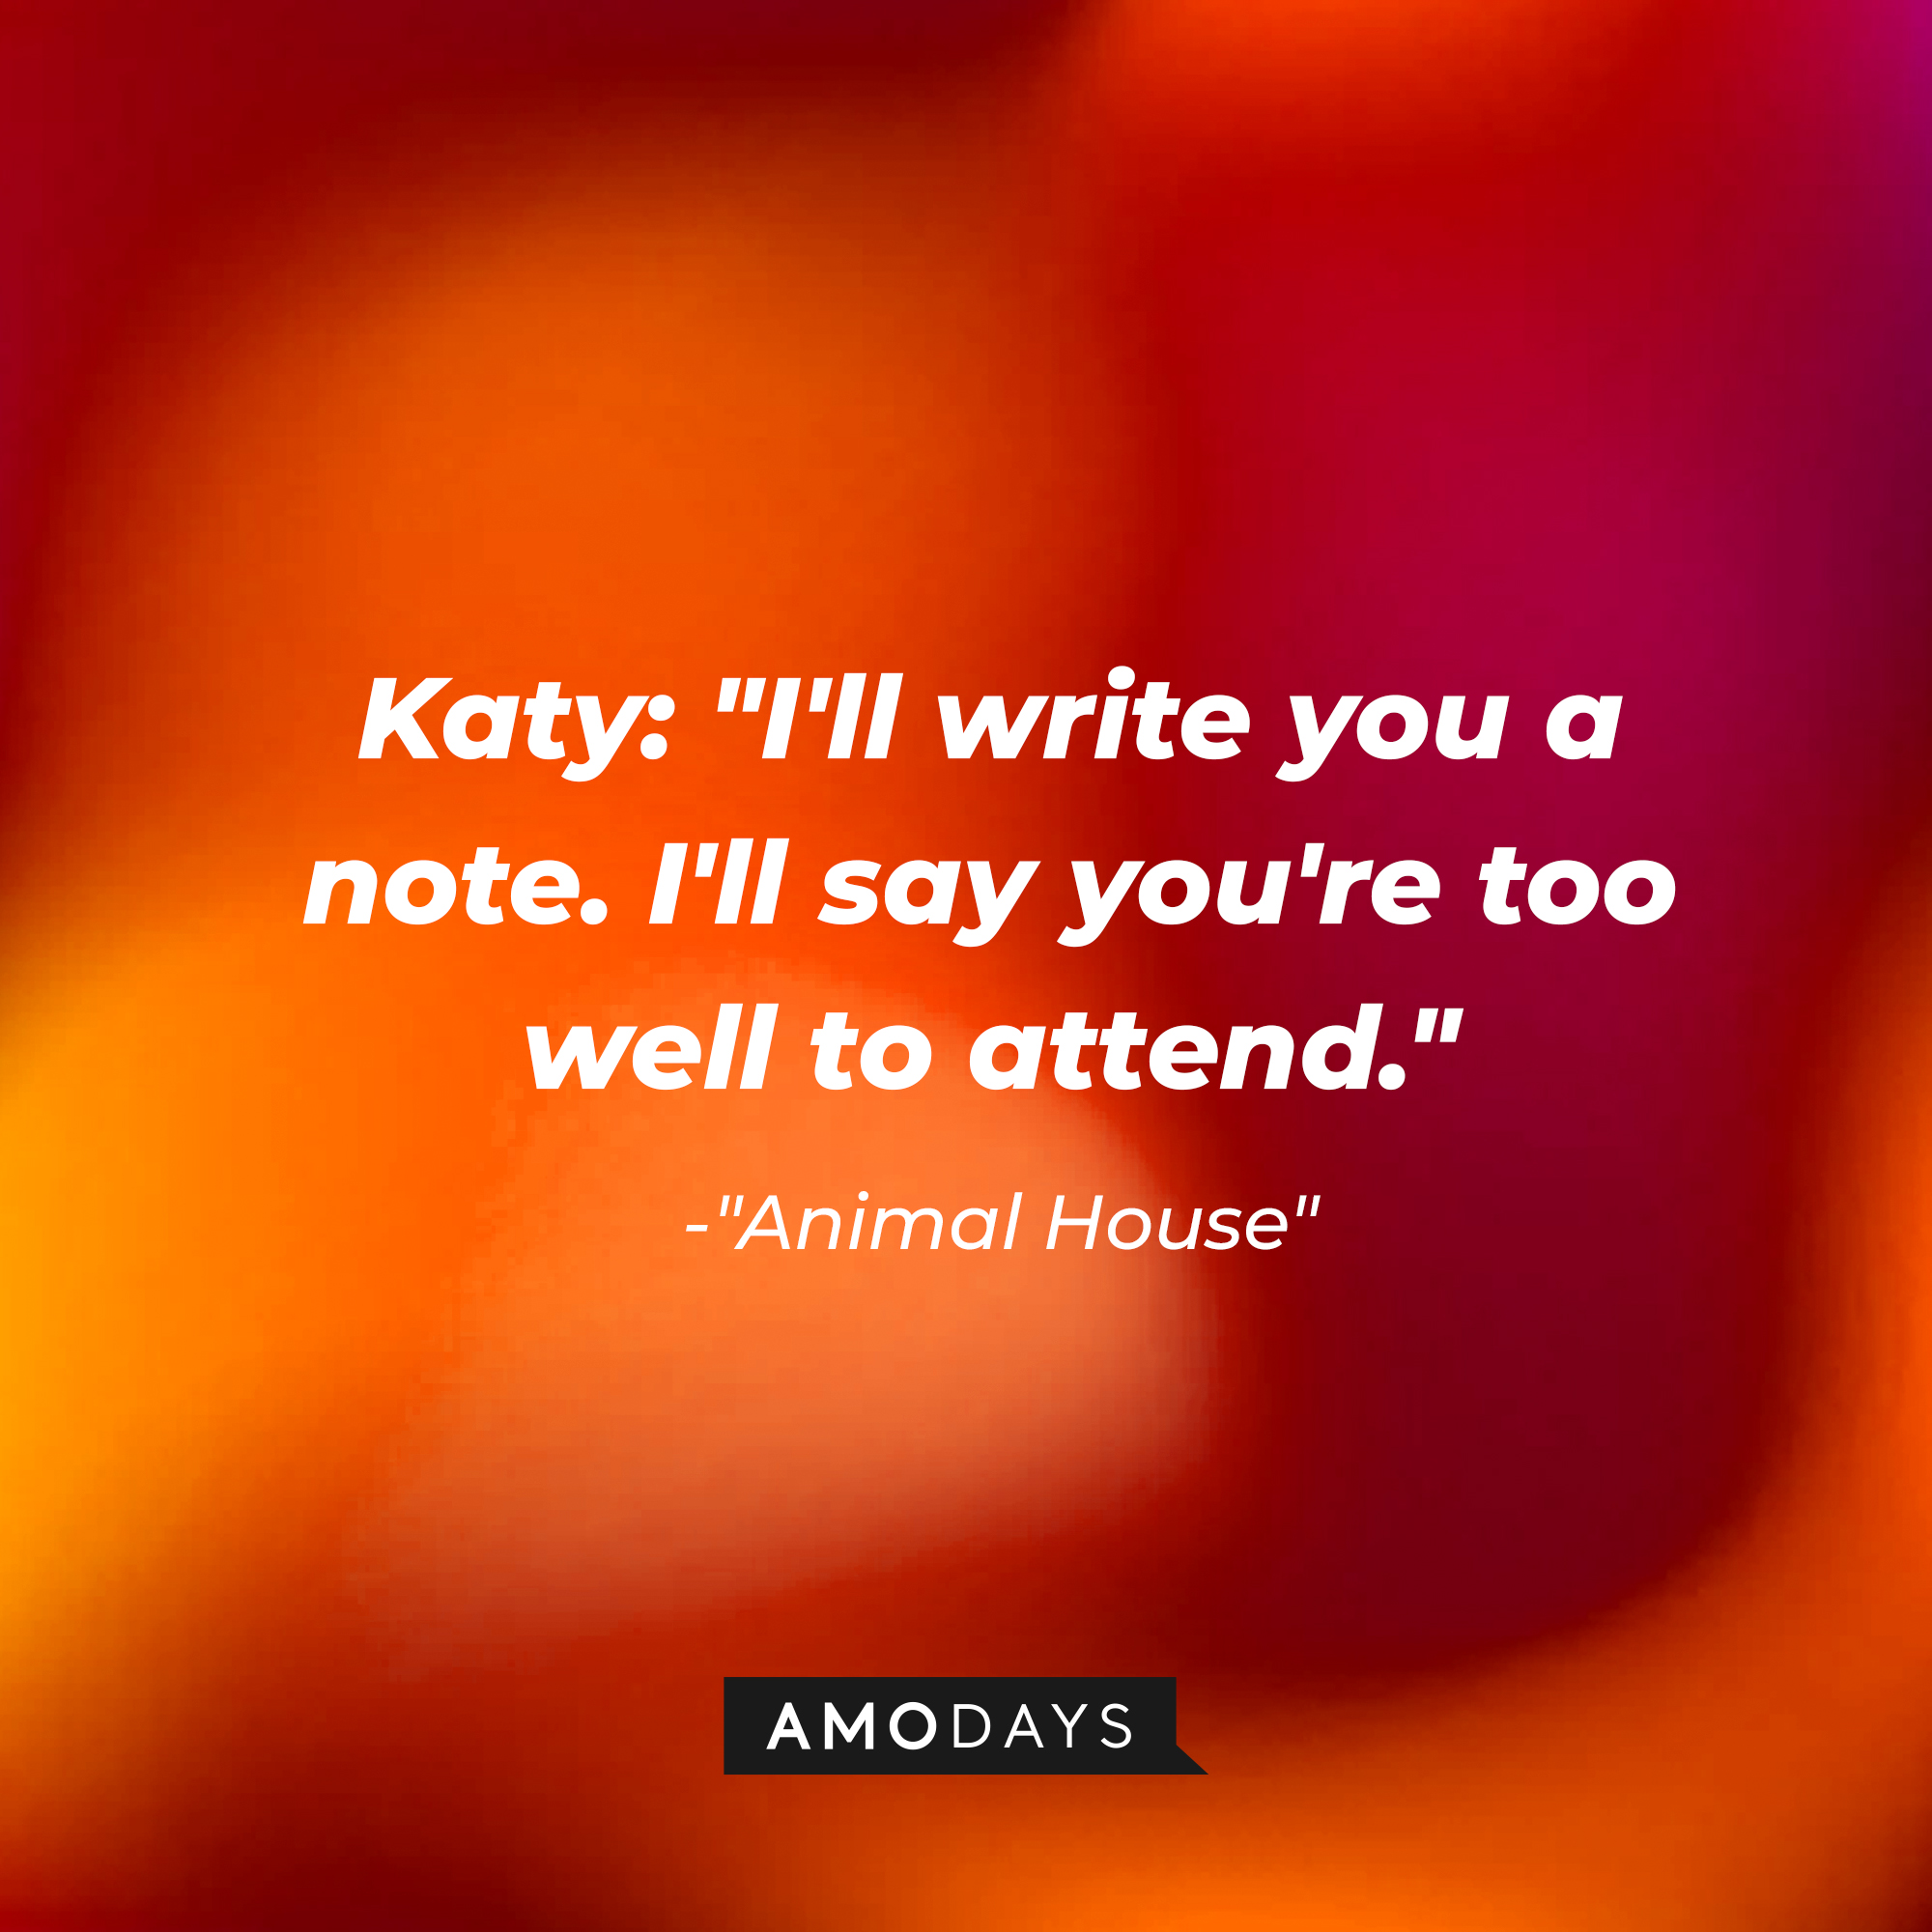 Katy's quote: "I'll write you a note. I'll say you're too well to attend." | Source: Amodays